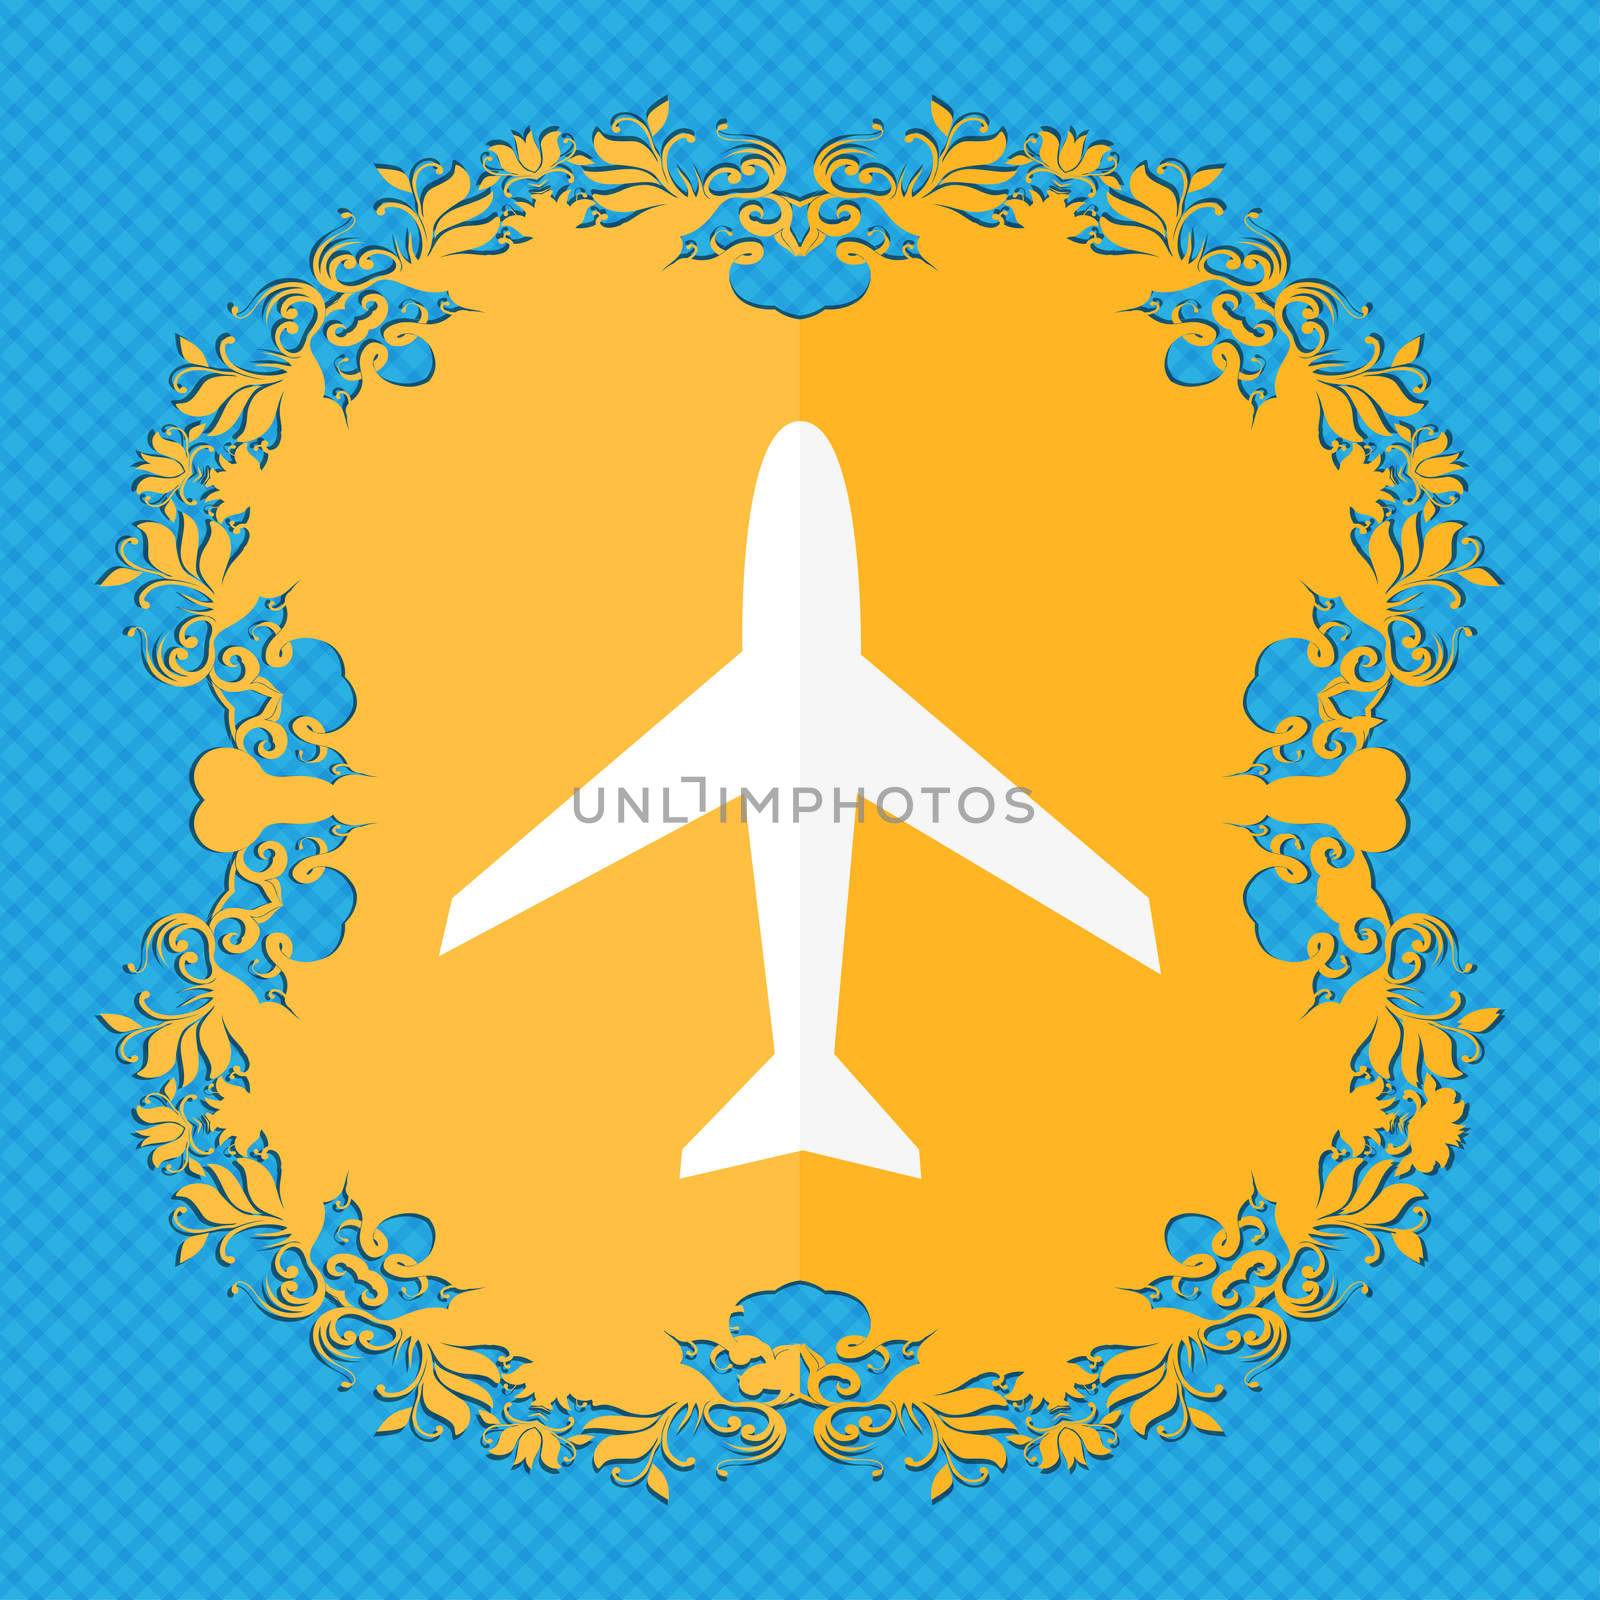 Airplane sign. Plane symbol. Travel icon. Flight flat label. Floral flat design on a blue abstract background with place for your text.  by serhii_lohvyniuk